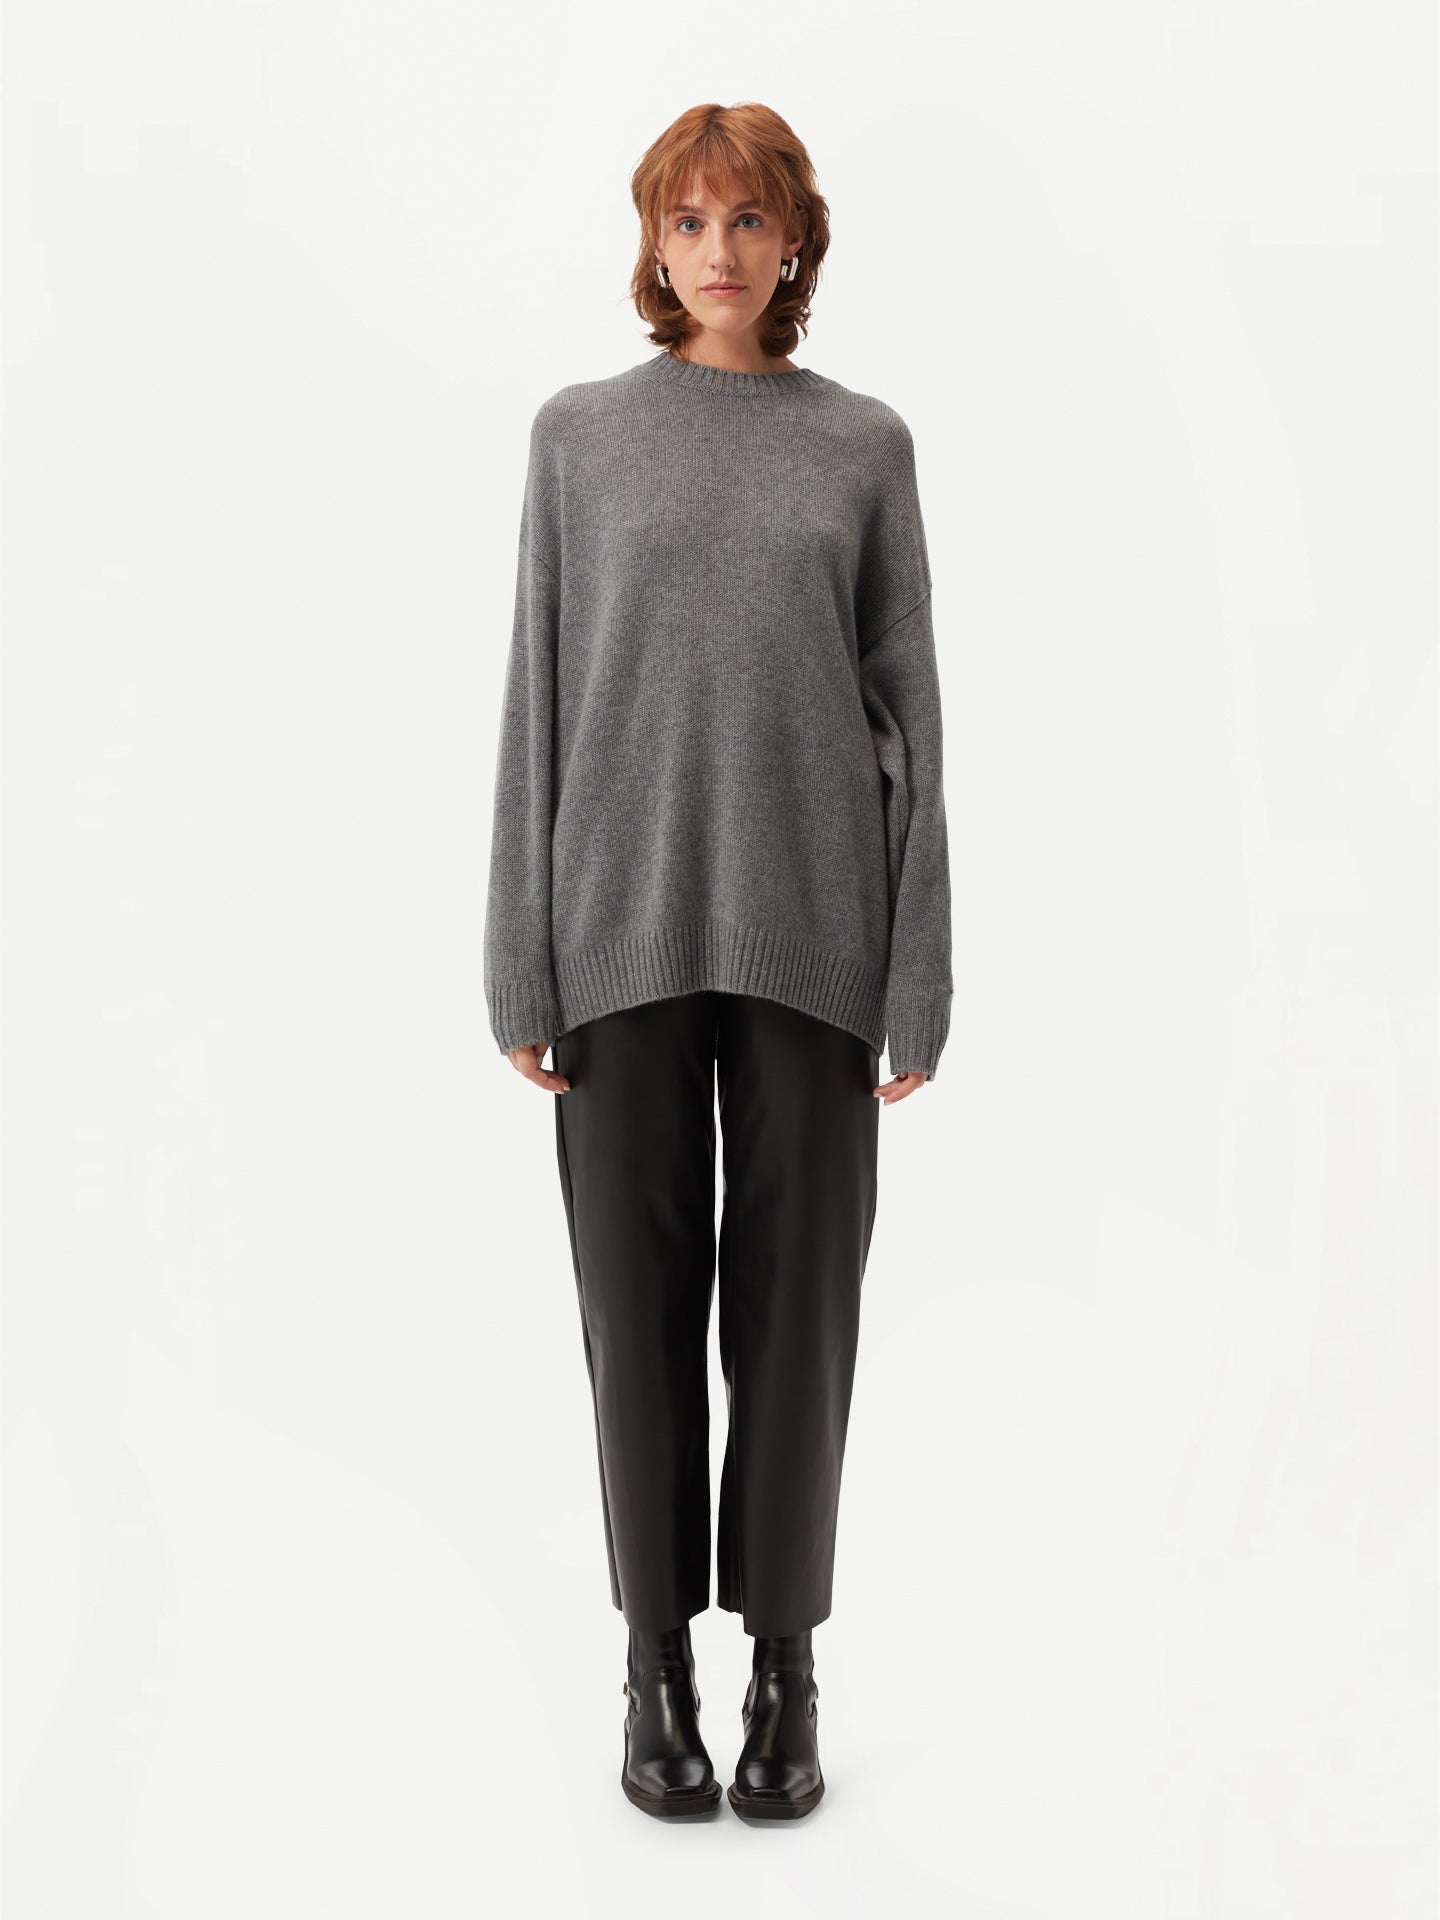 Women's Relaxed-Fit Cashmere Sweater Dim Gray - Gobi Cashmere